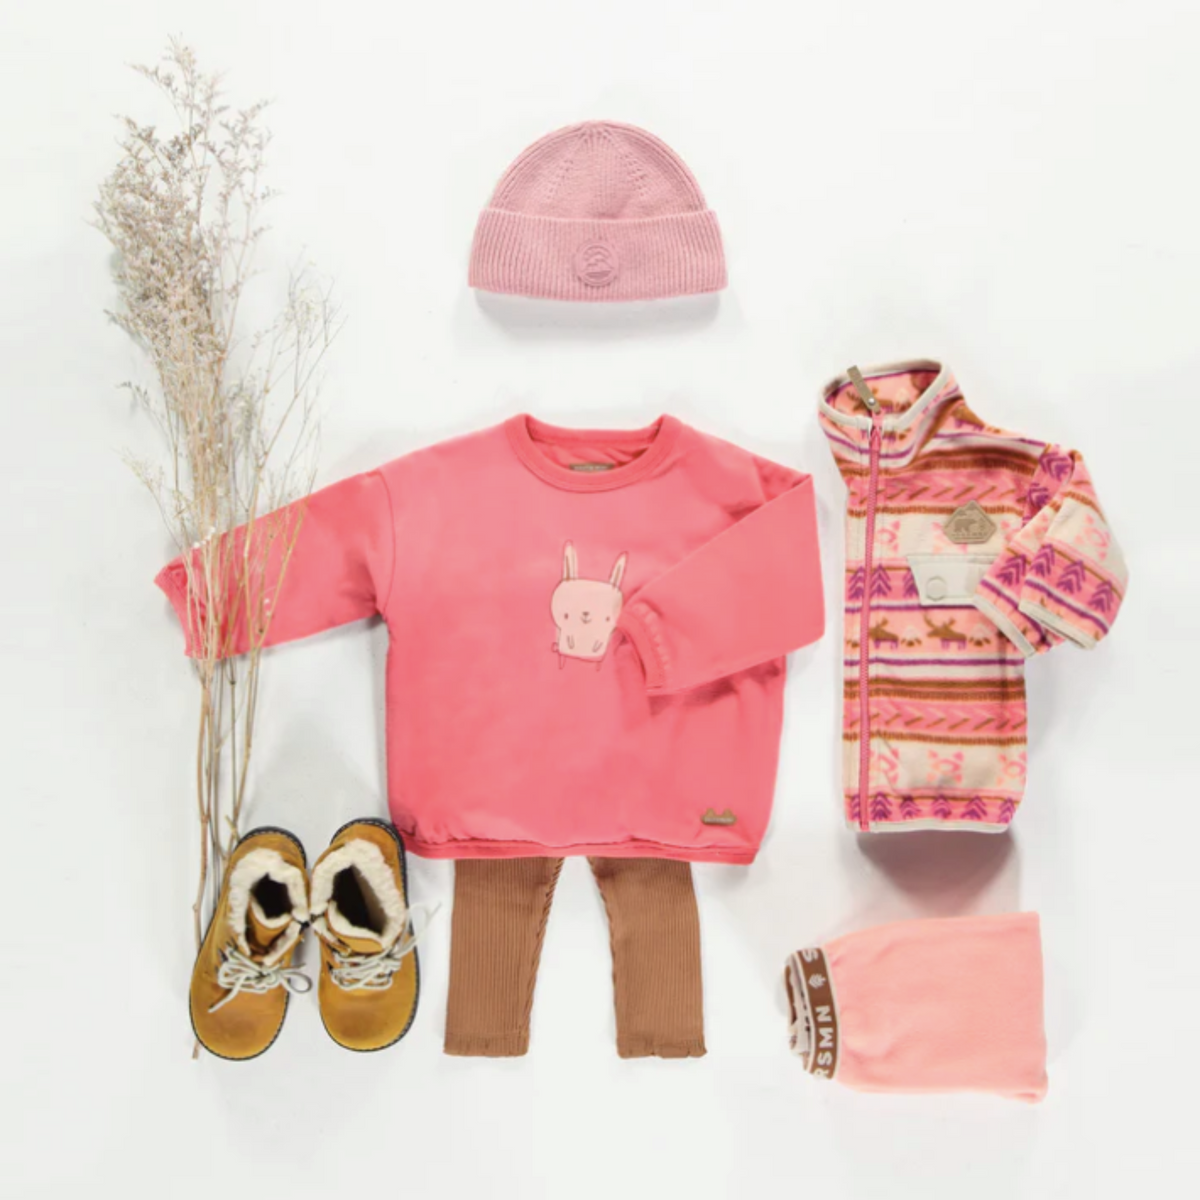 Pink Long Sleeved T-shirt with a Bunny in Soft Jersey, Toddler